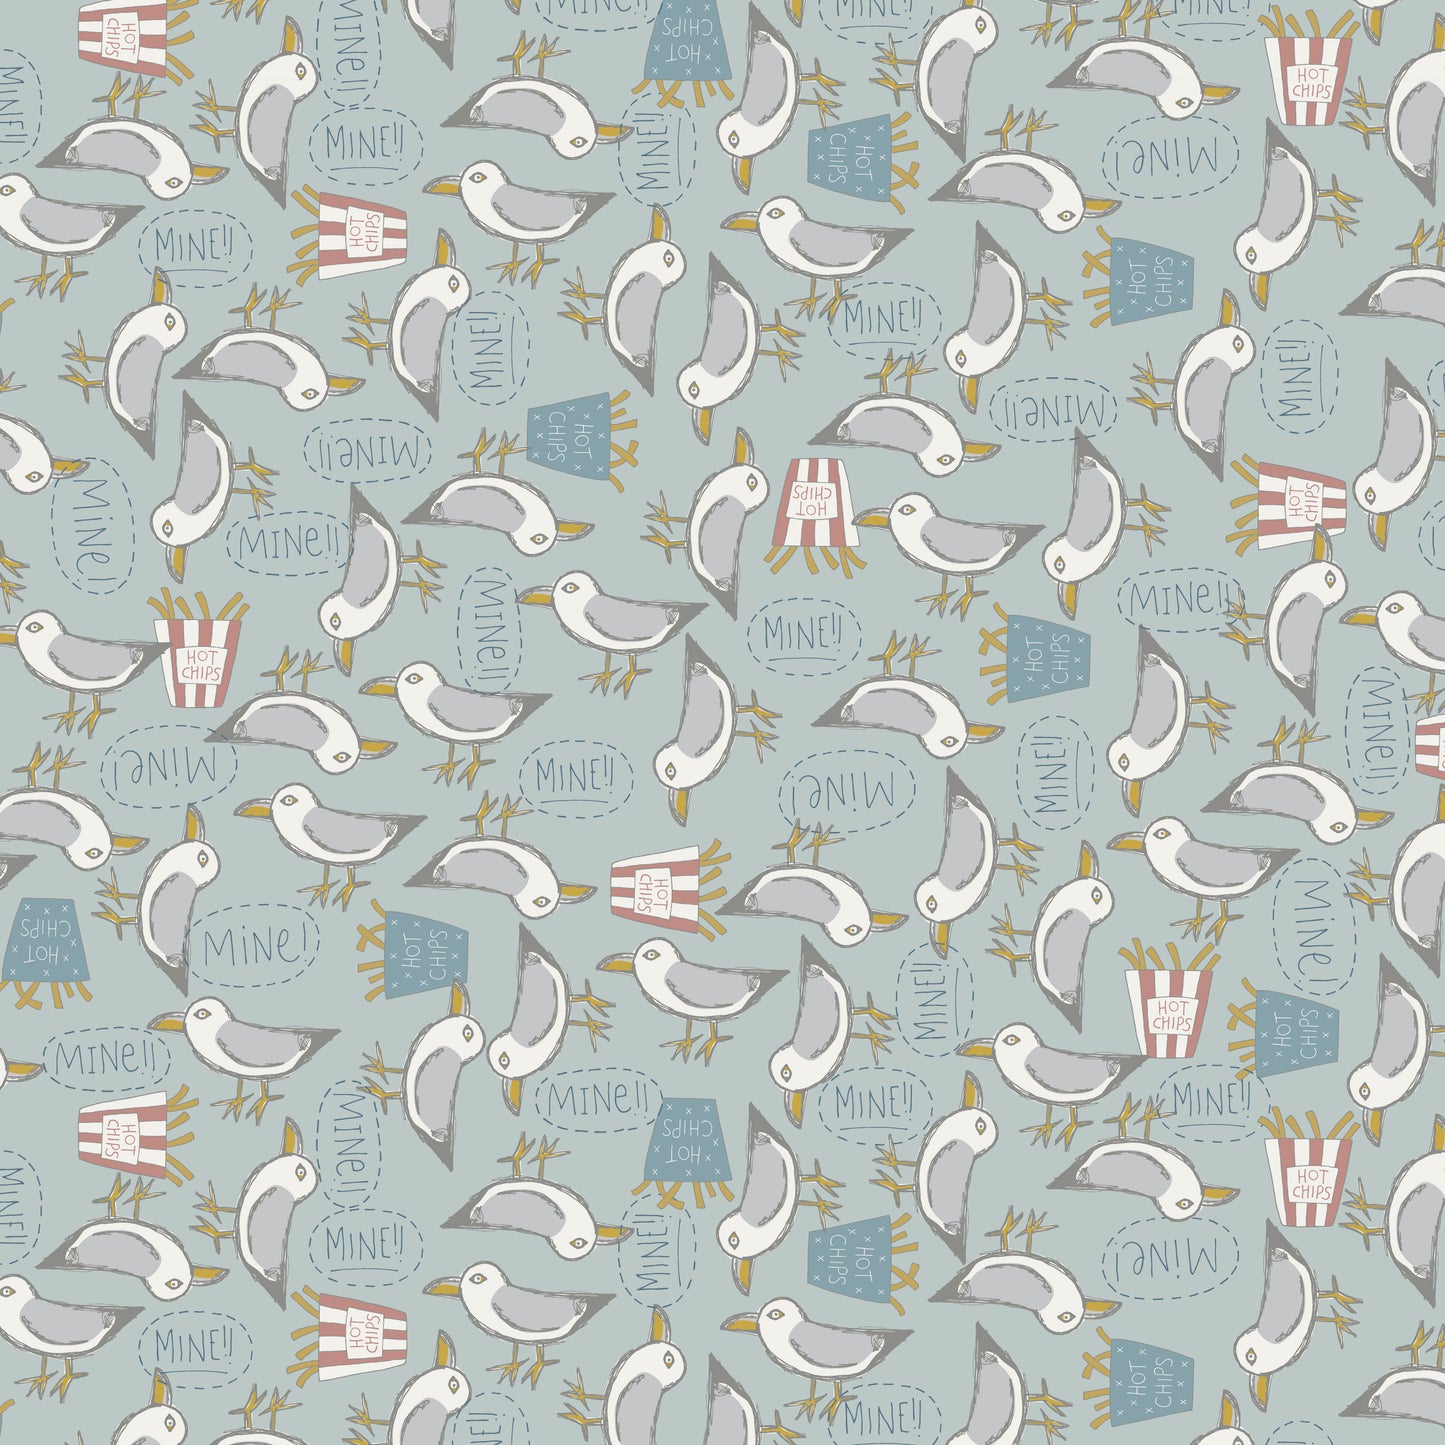 Sunkissed Sojourn Blue Seagull DV6117 by Natalie Bird of Birdhouse Designs for Devonstone (sold in 25cm increments)